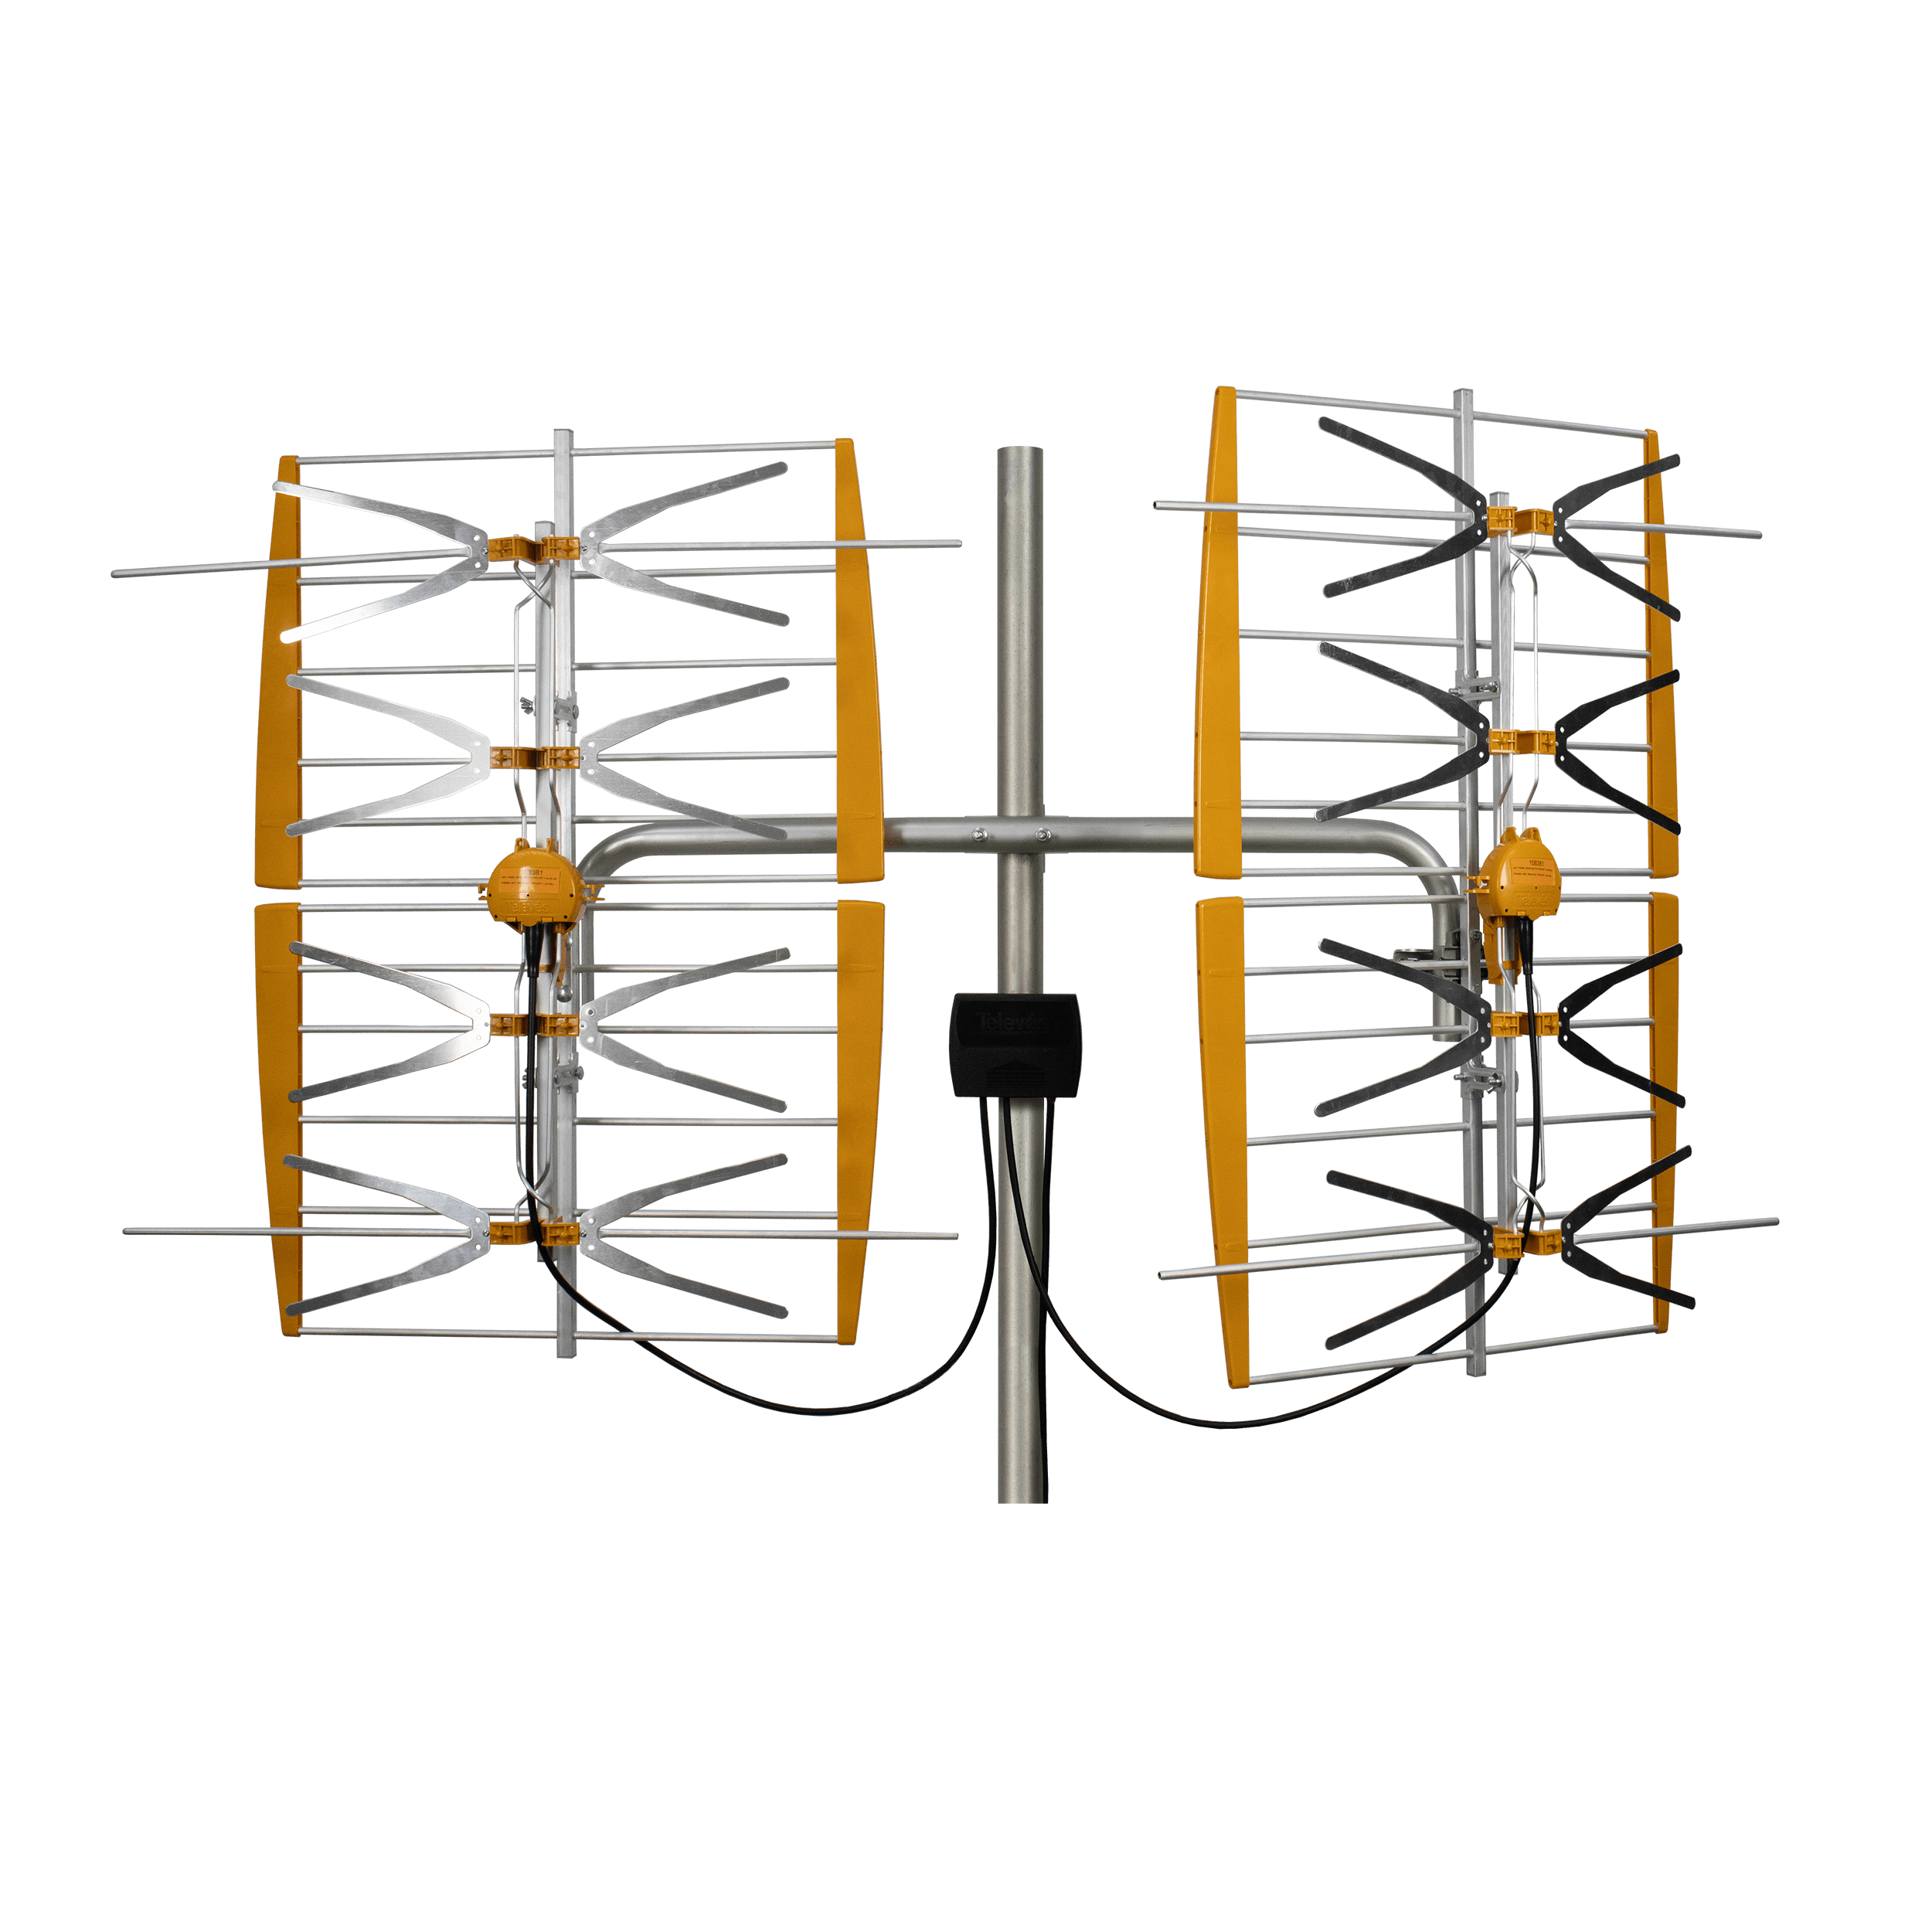 Ness Electronics, Inc, Televes 108381, 8 Bay Dipole Array Powered Antenna, hi-VHF/UHF, 5G/LTE Filtered, Multi-directional Dual Market